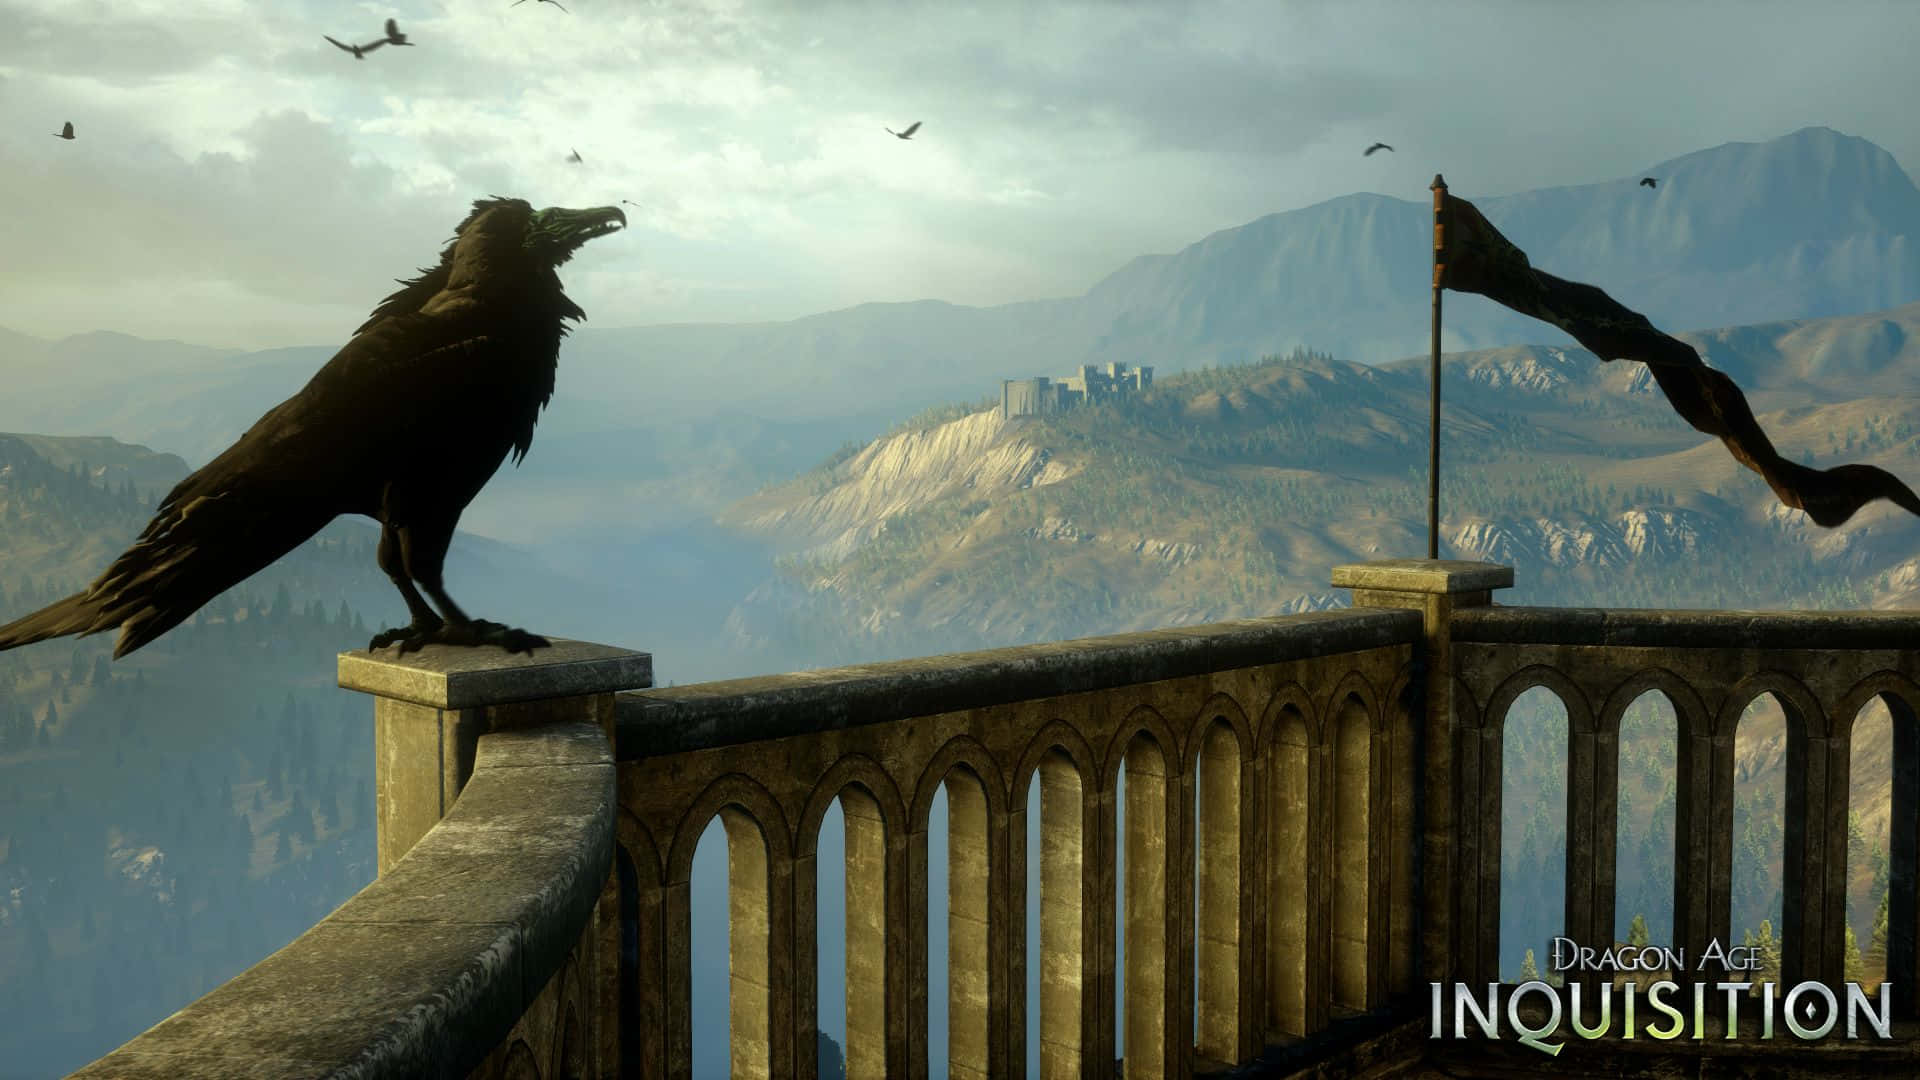 Explore the stunningly beautiful world of Dragon Age Inquisition.